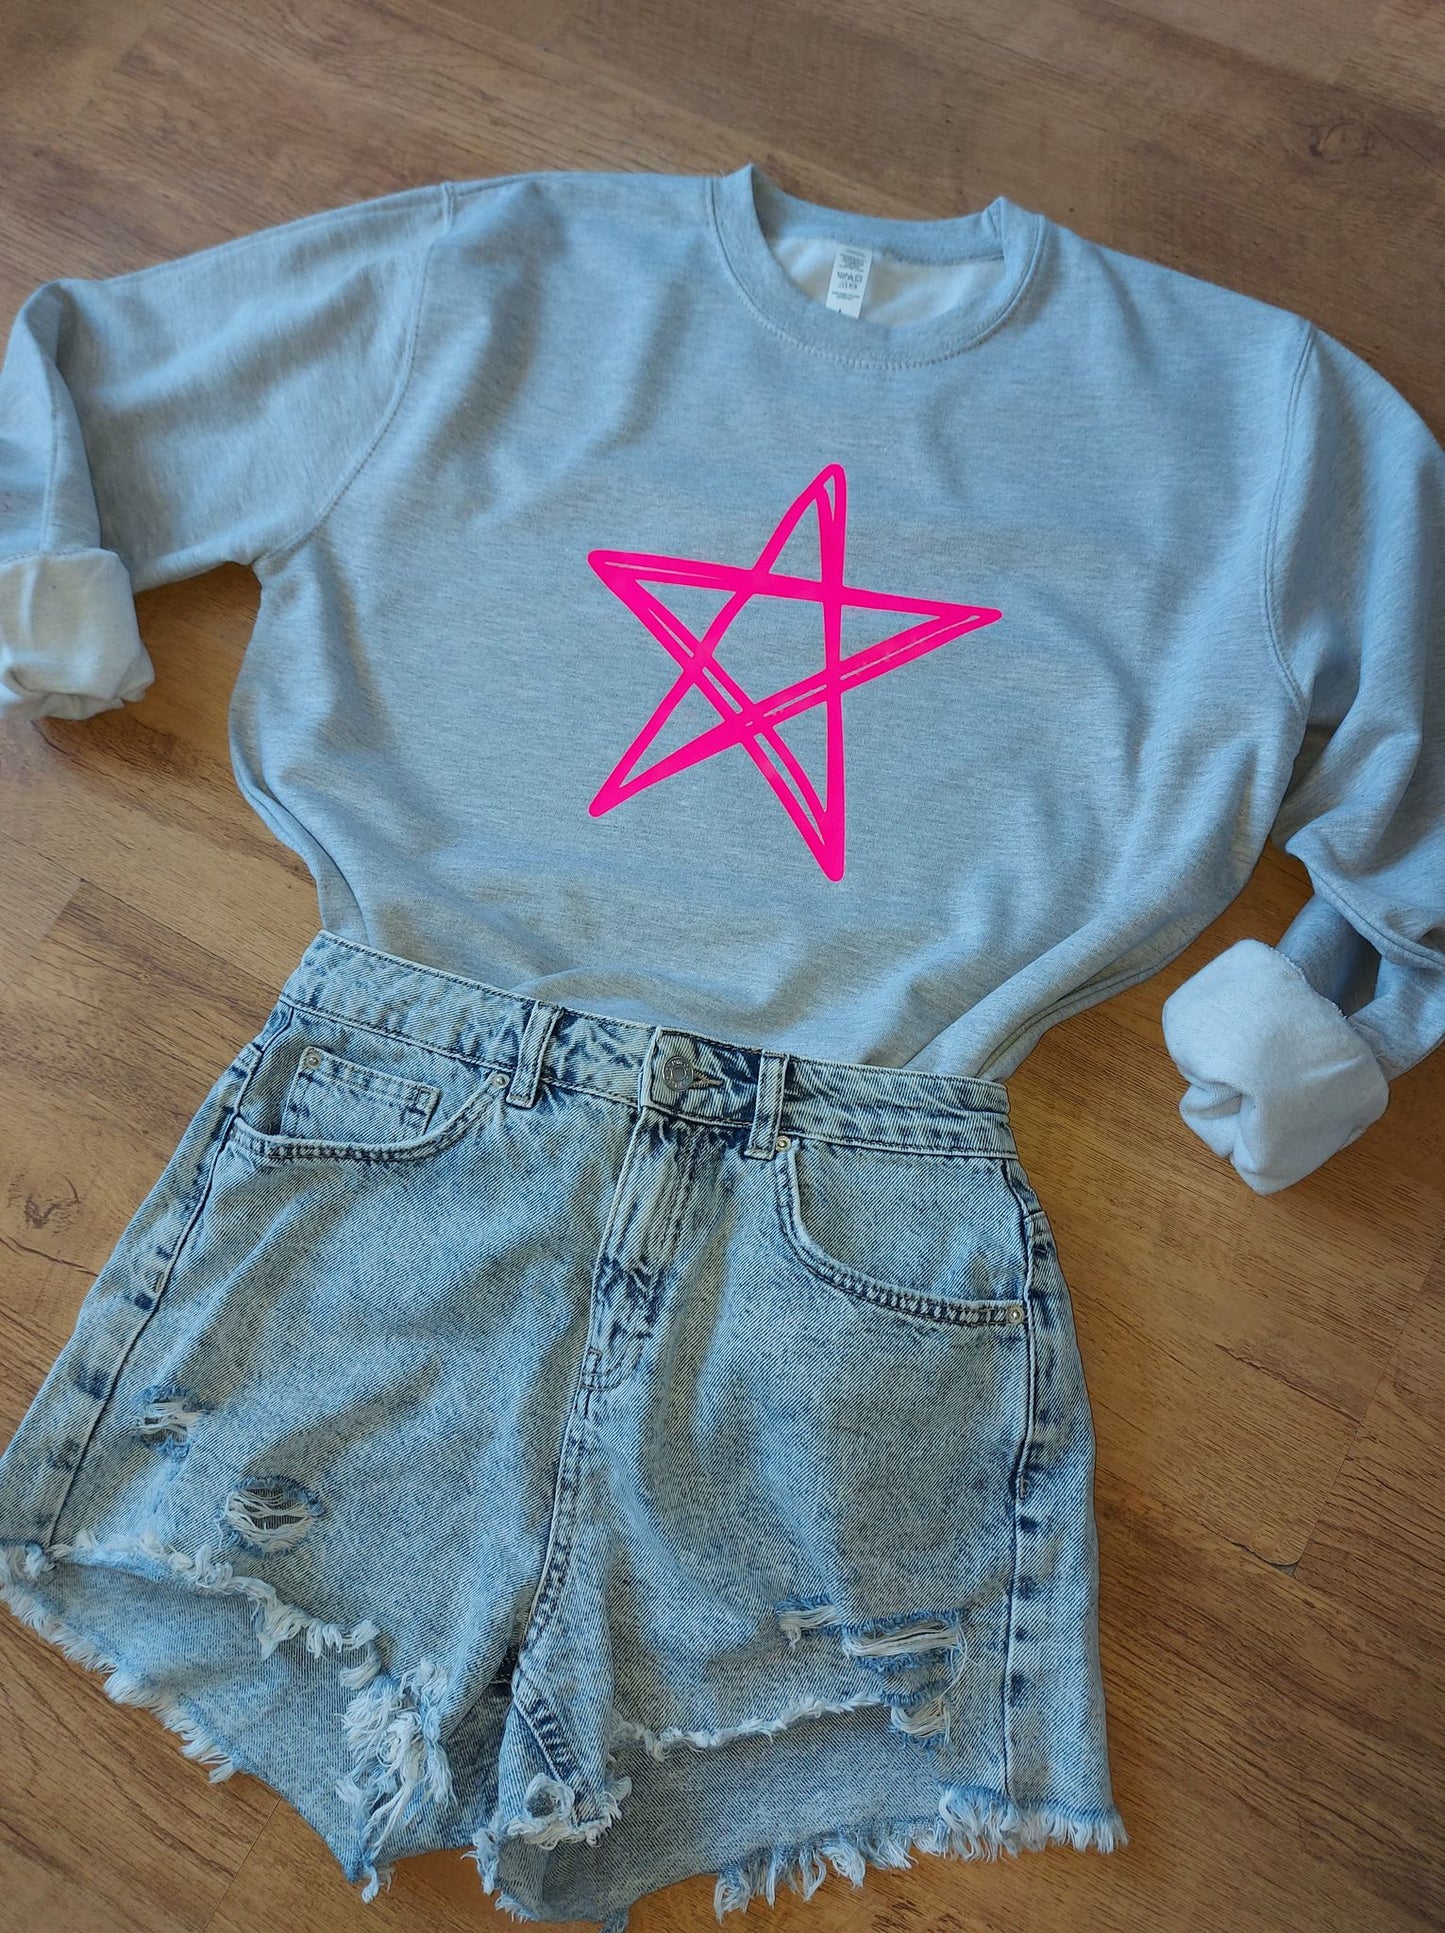 Sketch Star Sweater ( Neon And Pastel Colours Available)